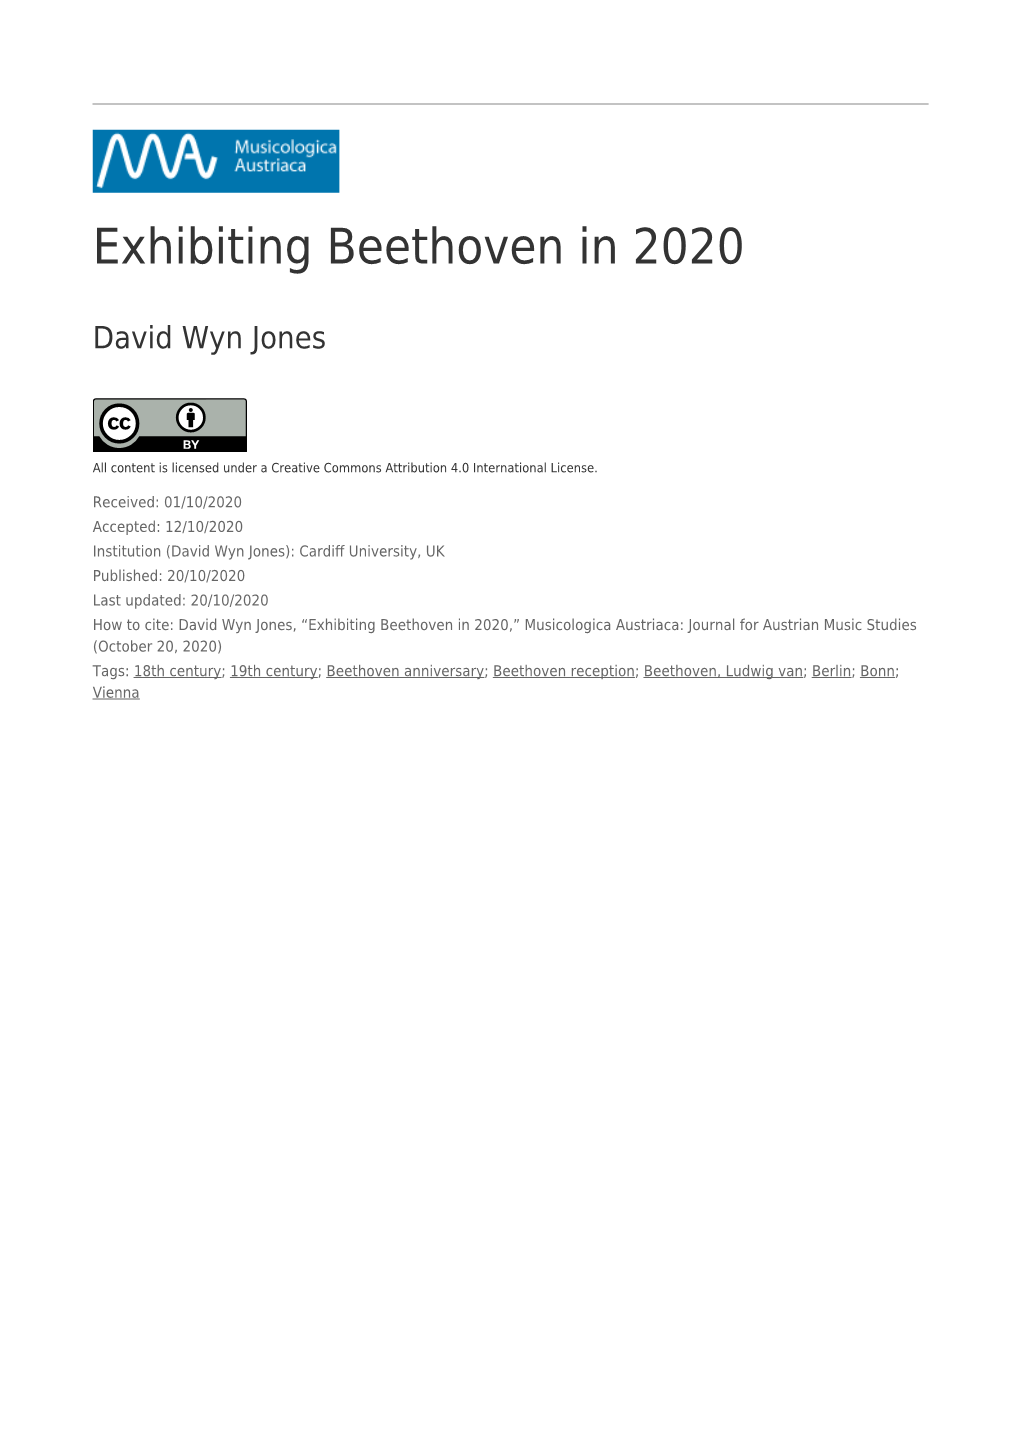 Beethoven in 2020